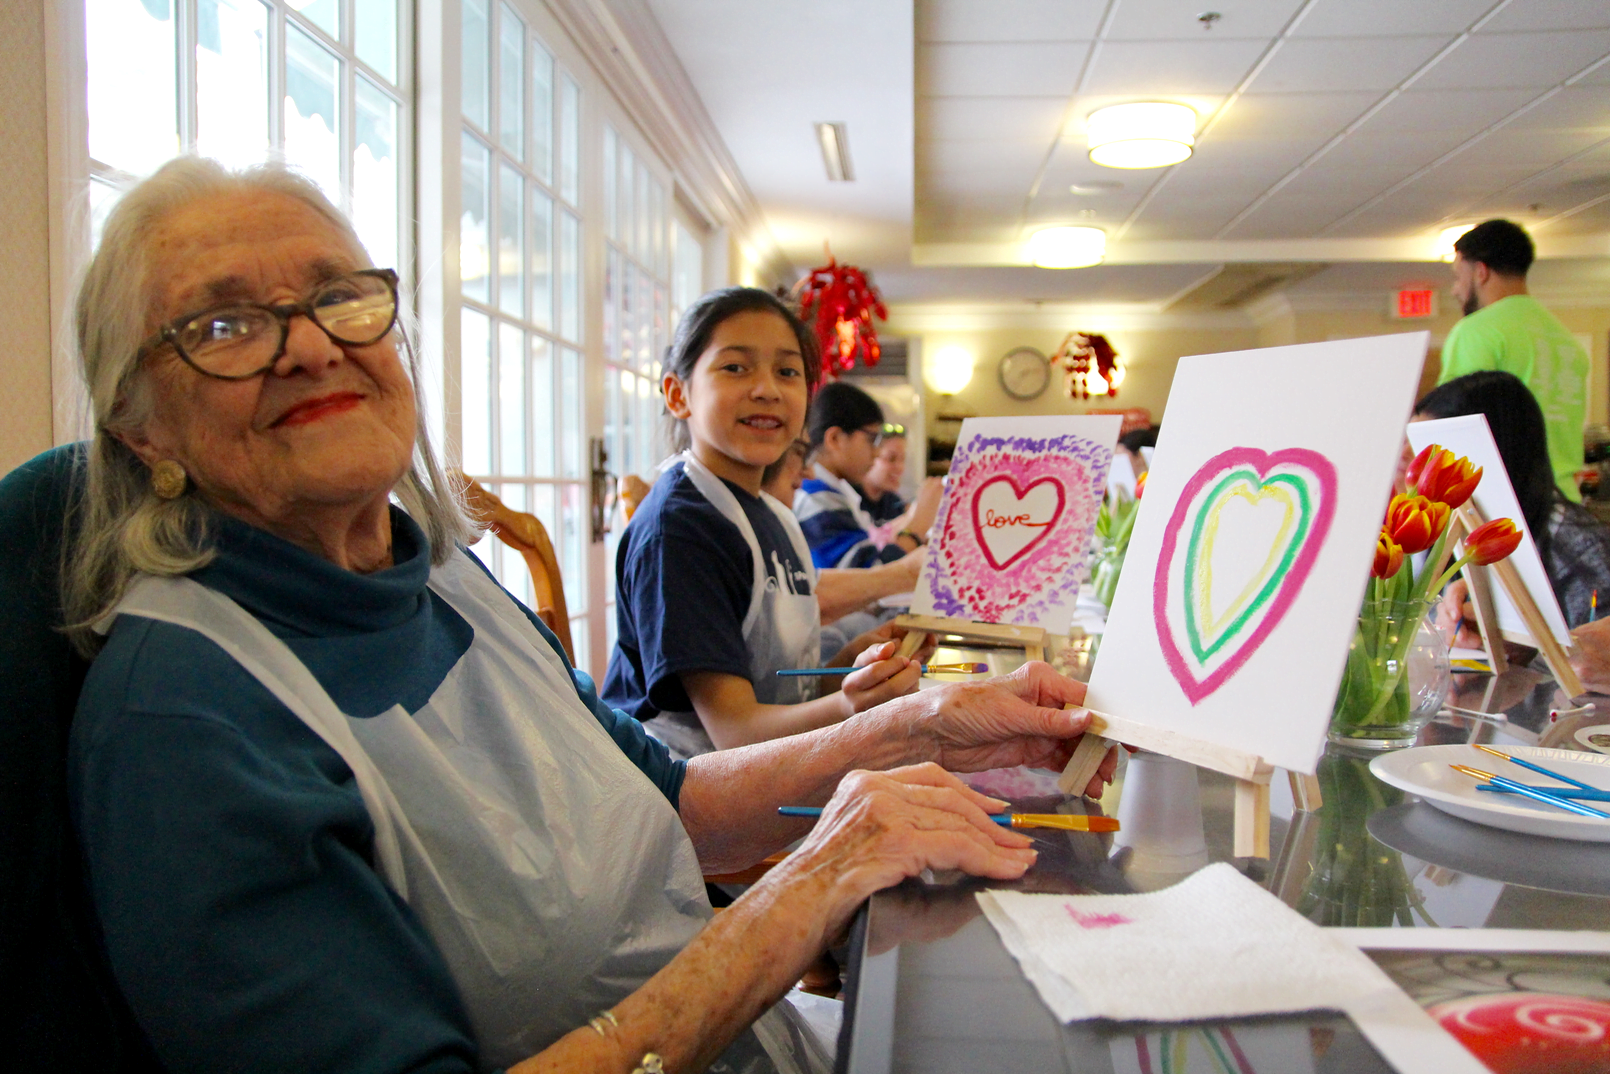 Katherine and Maryssa painted hearts together on Saturday at Parsonage Cottage. Feb 17, 2018 Photo: Leslie Yager